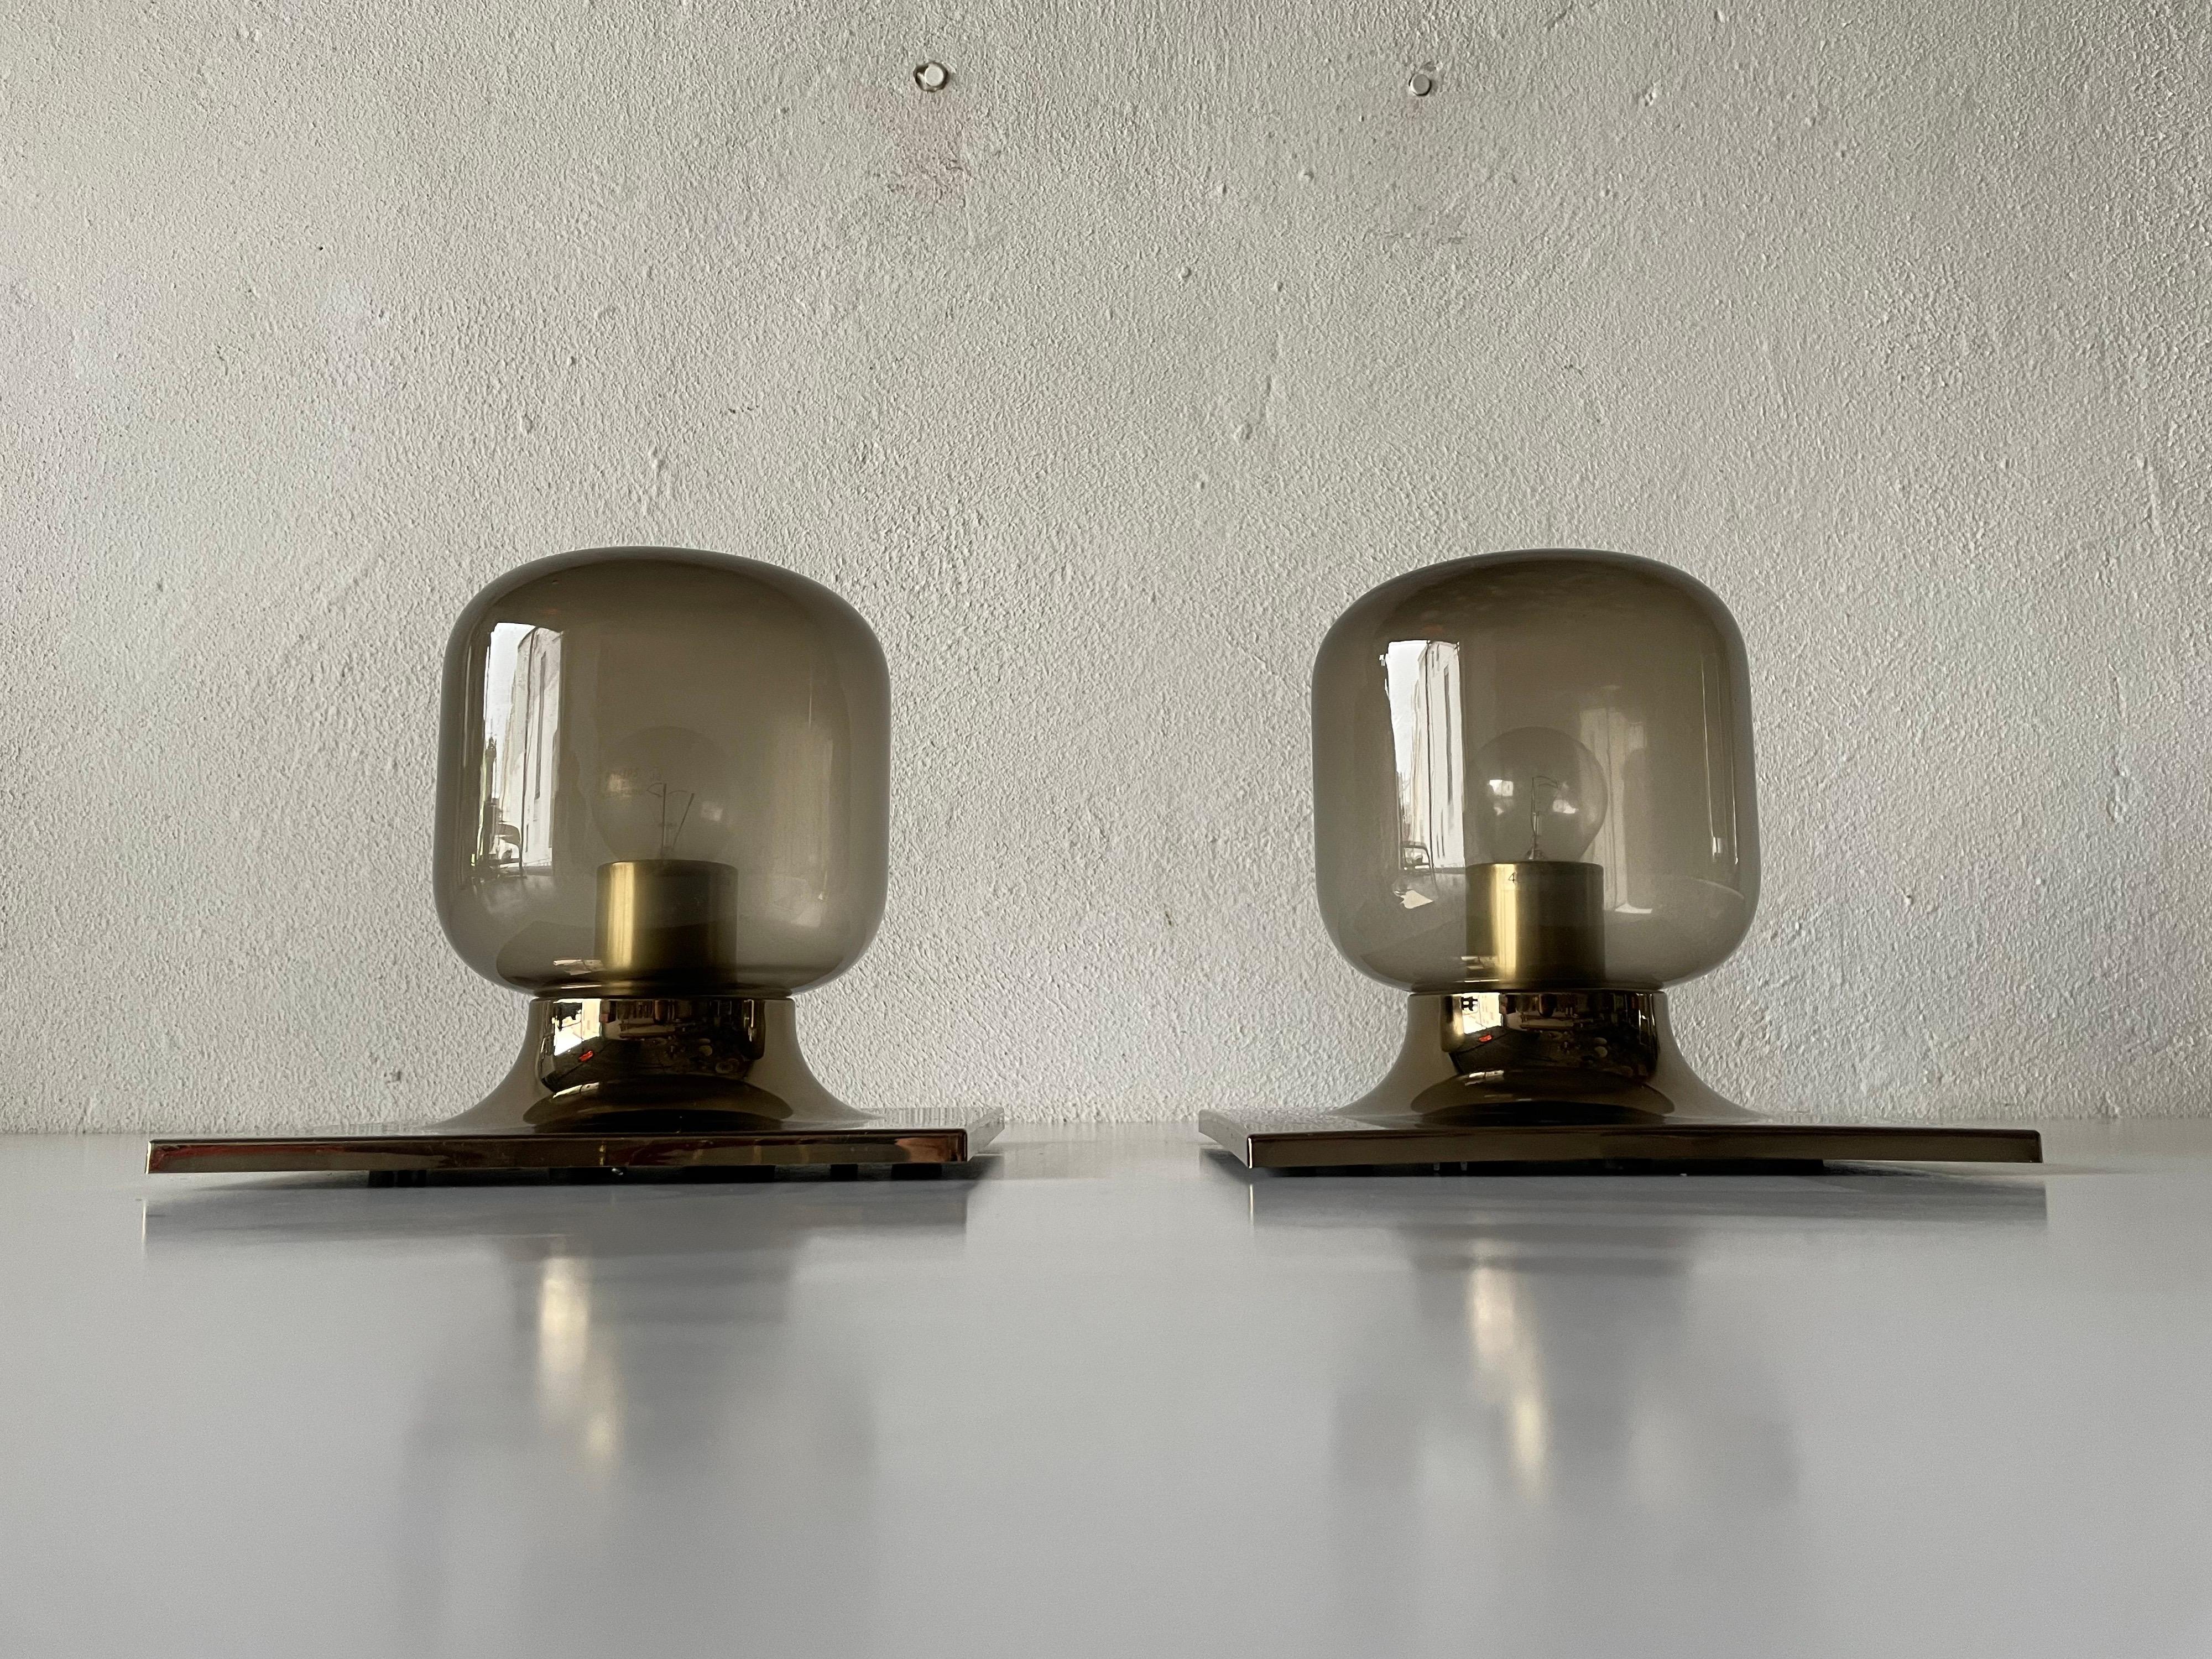 Mid-Century Modern Pair of Wall or Ceiling Lamps by Motoko Ishii for Staff, 1960s, Germany